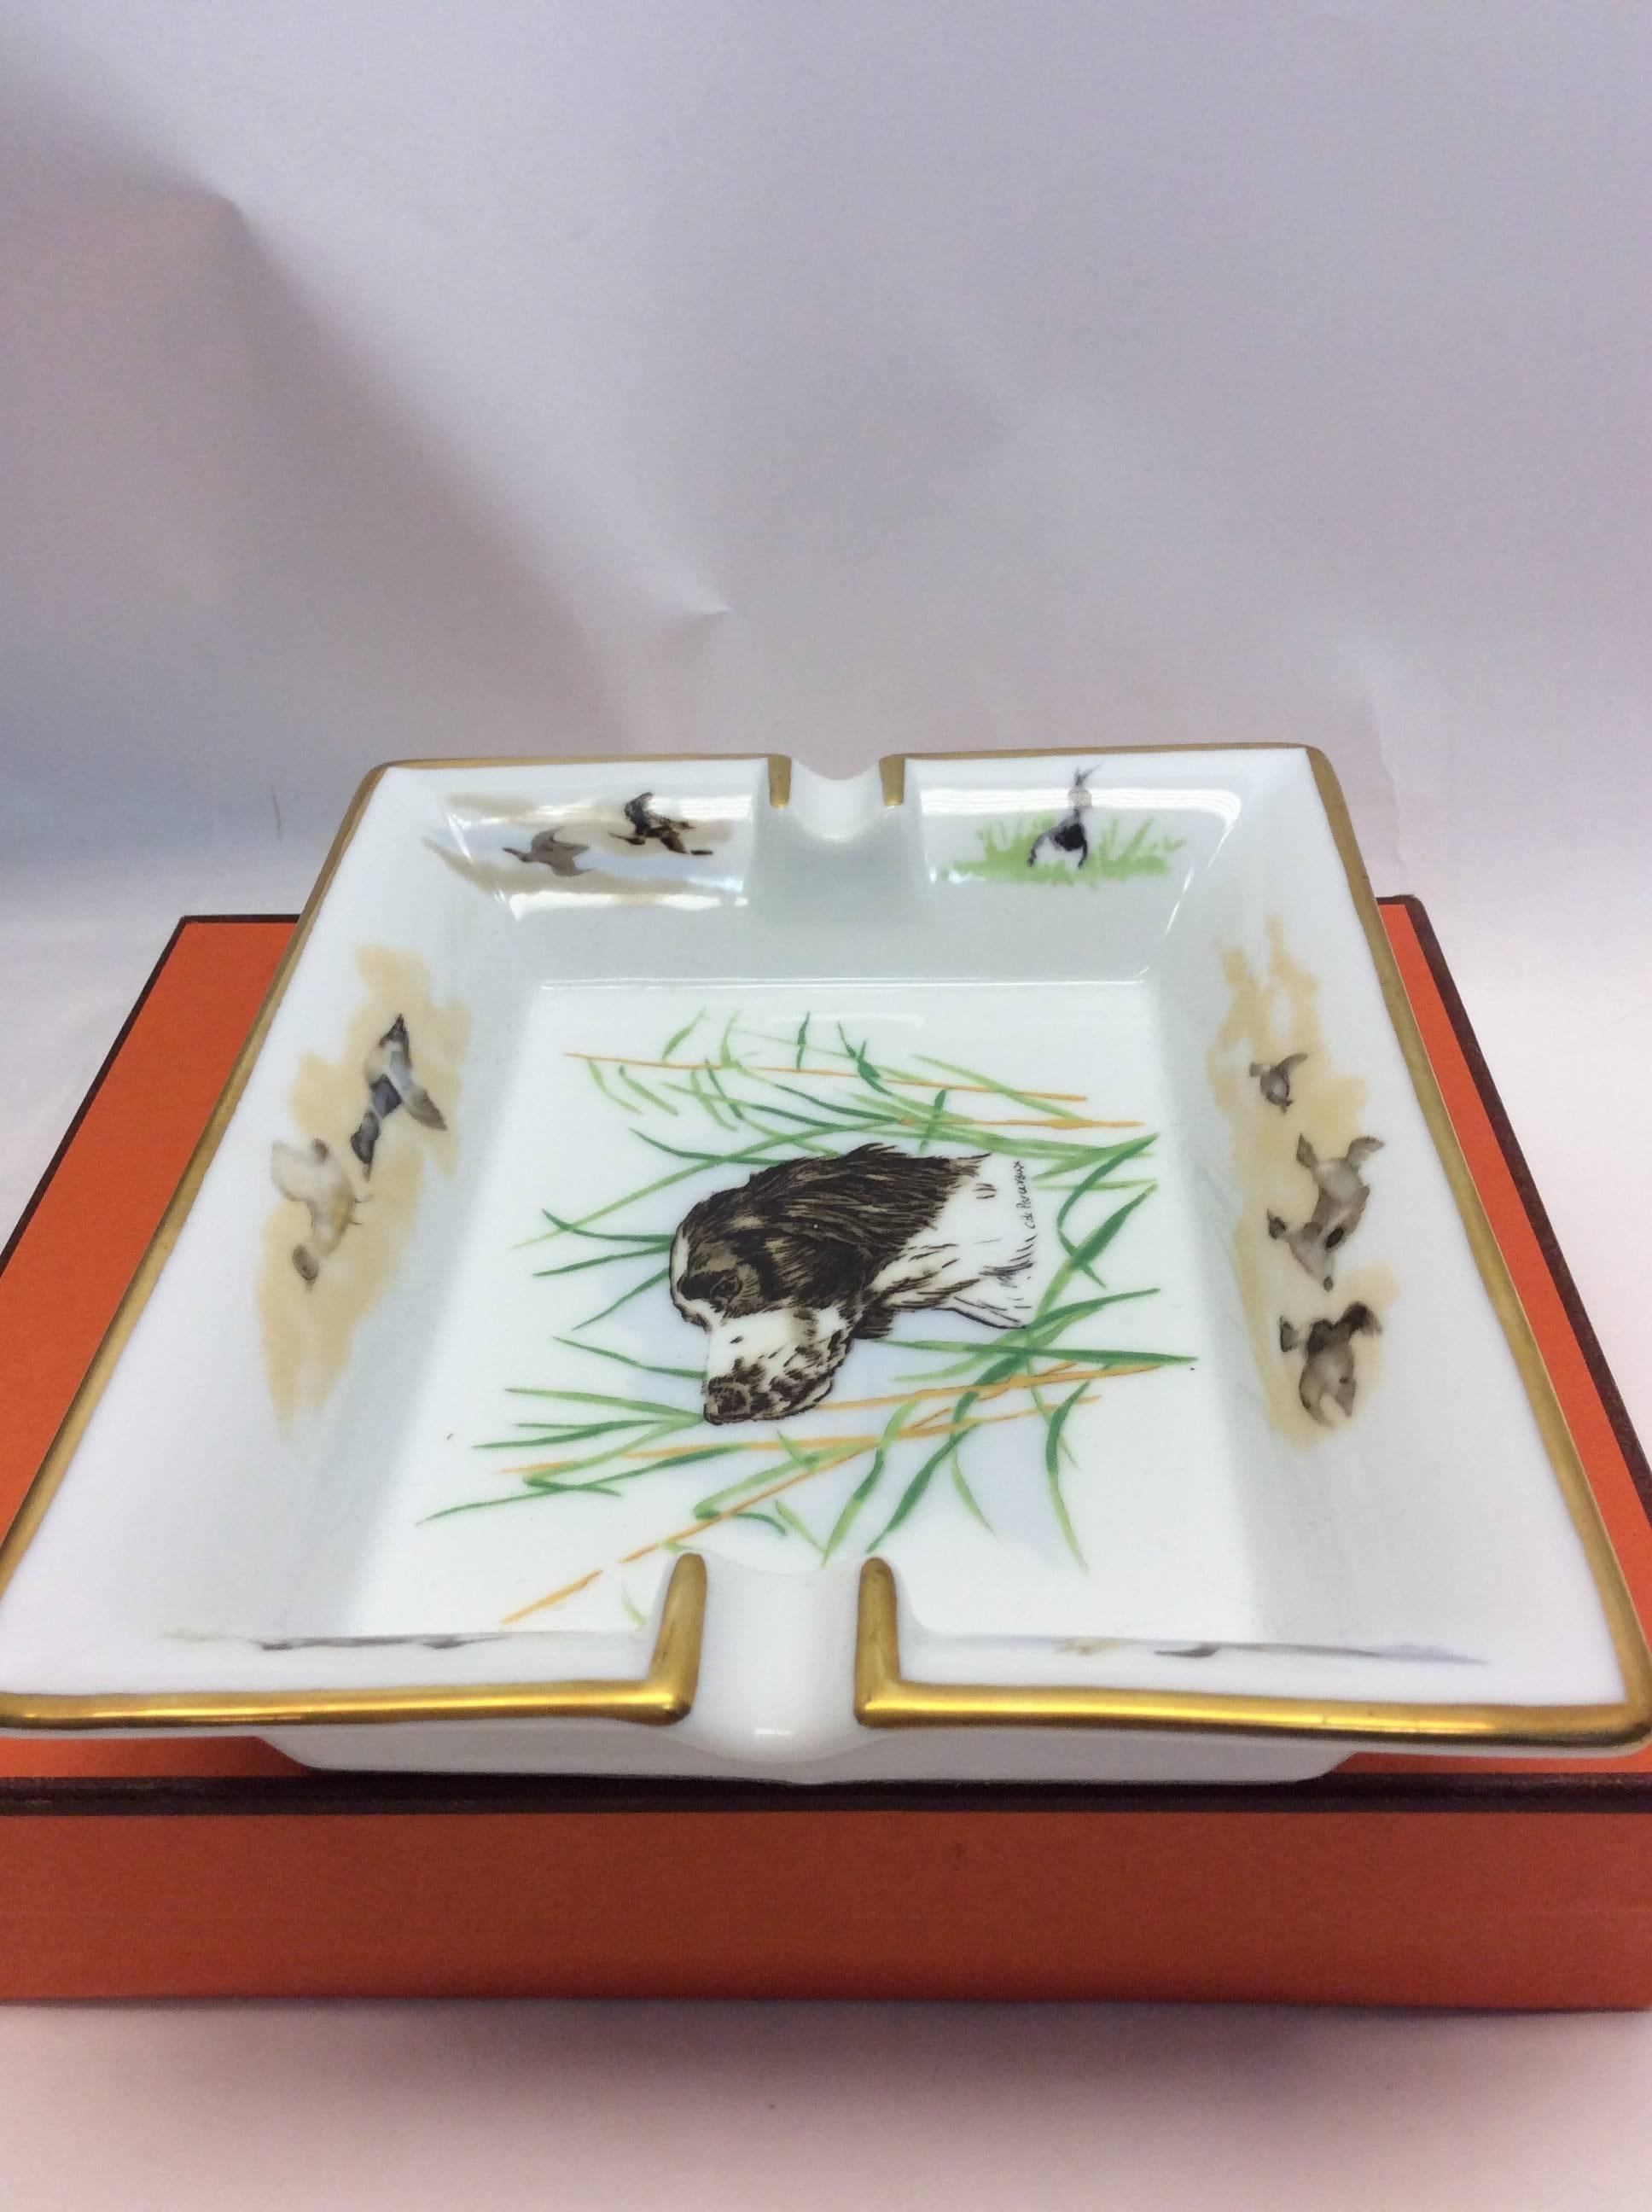 Hermes Ceramic Dog & Bird Ash Tray
Comes with Hermes box
Dog and bird design
Made in France
$299